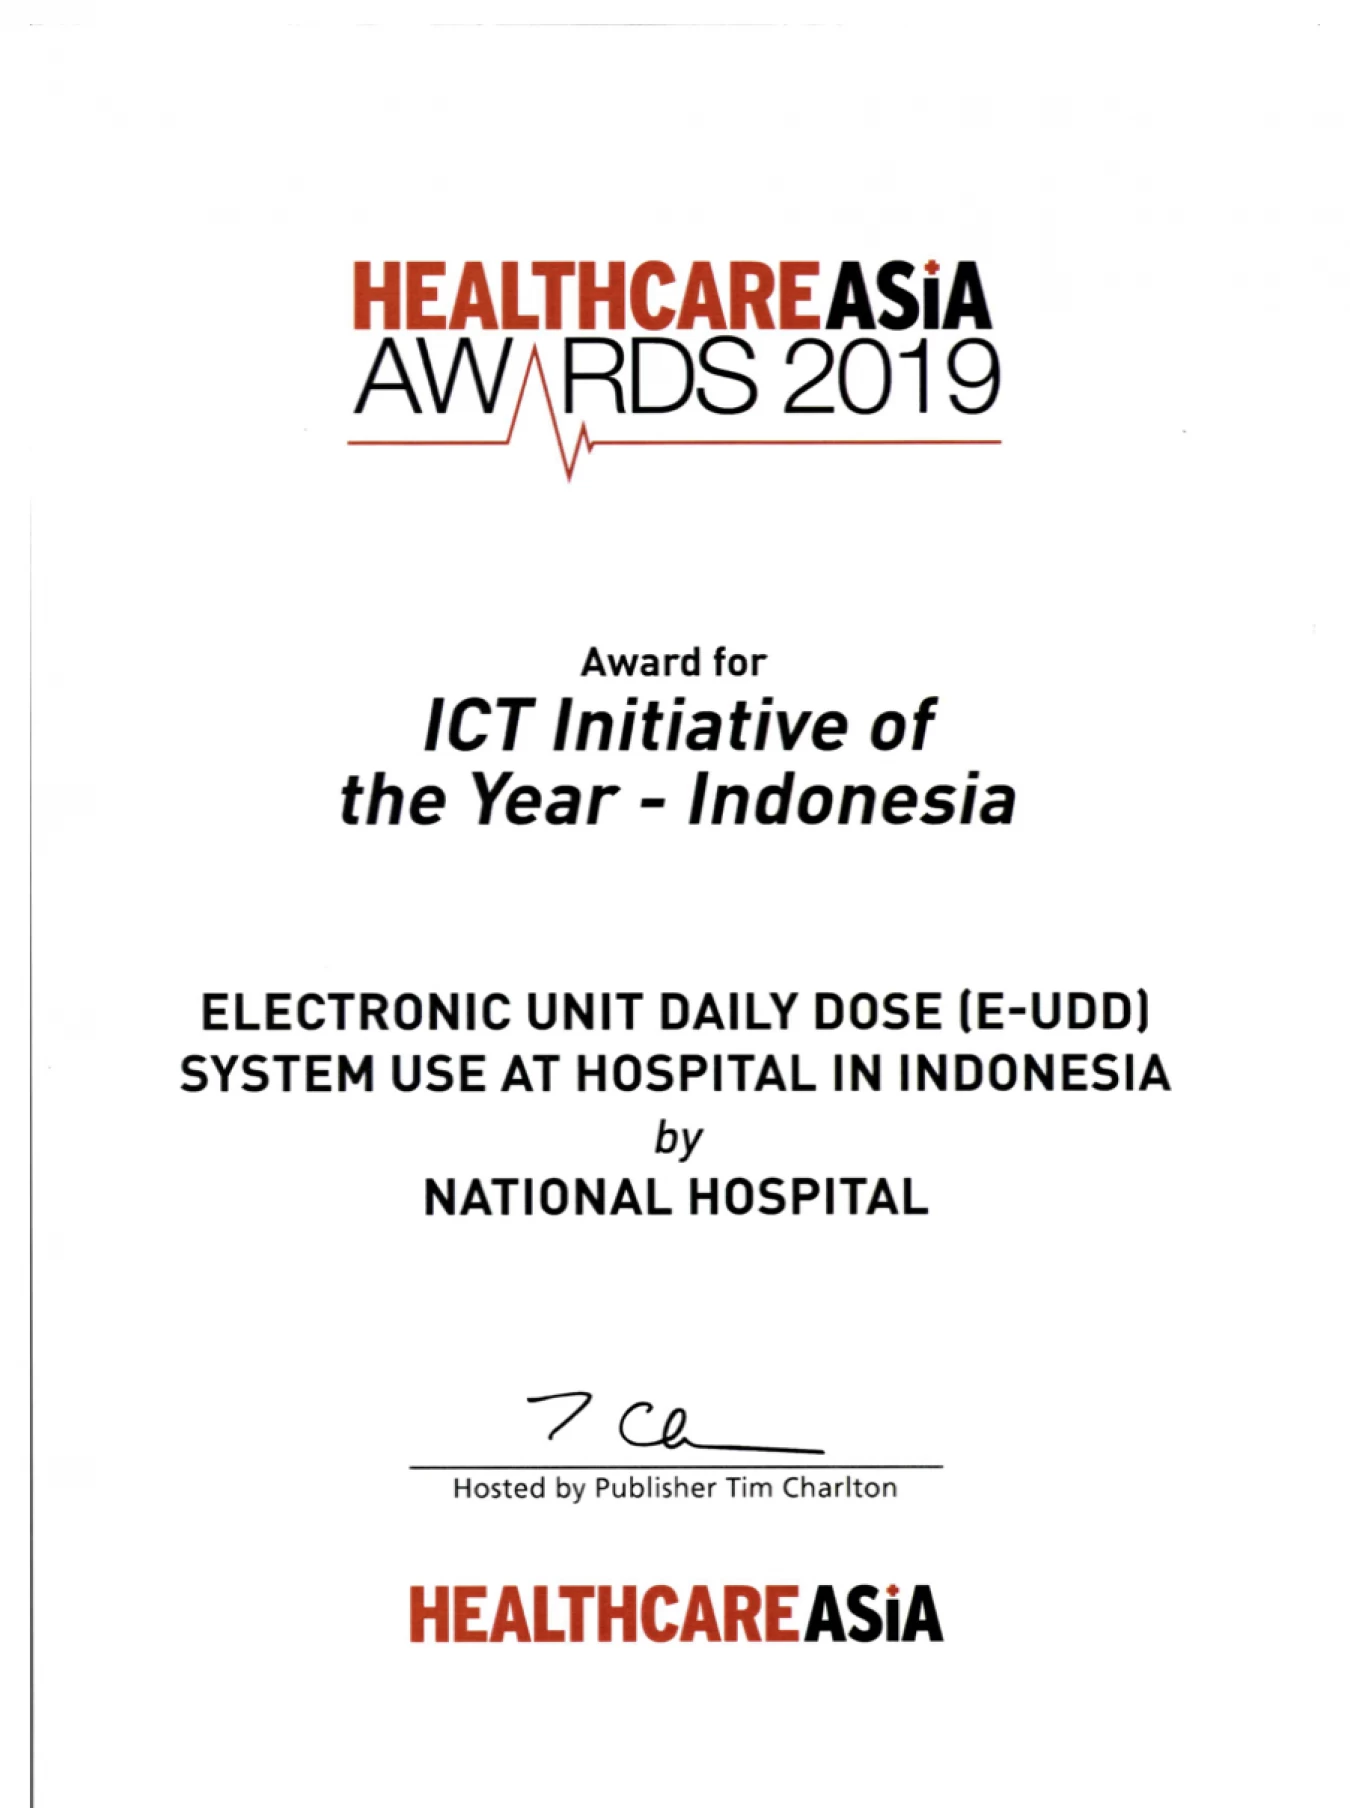 Healthcare Asia Awards 2019-ICT Initiative of the Year